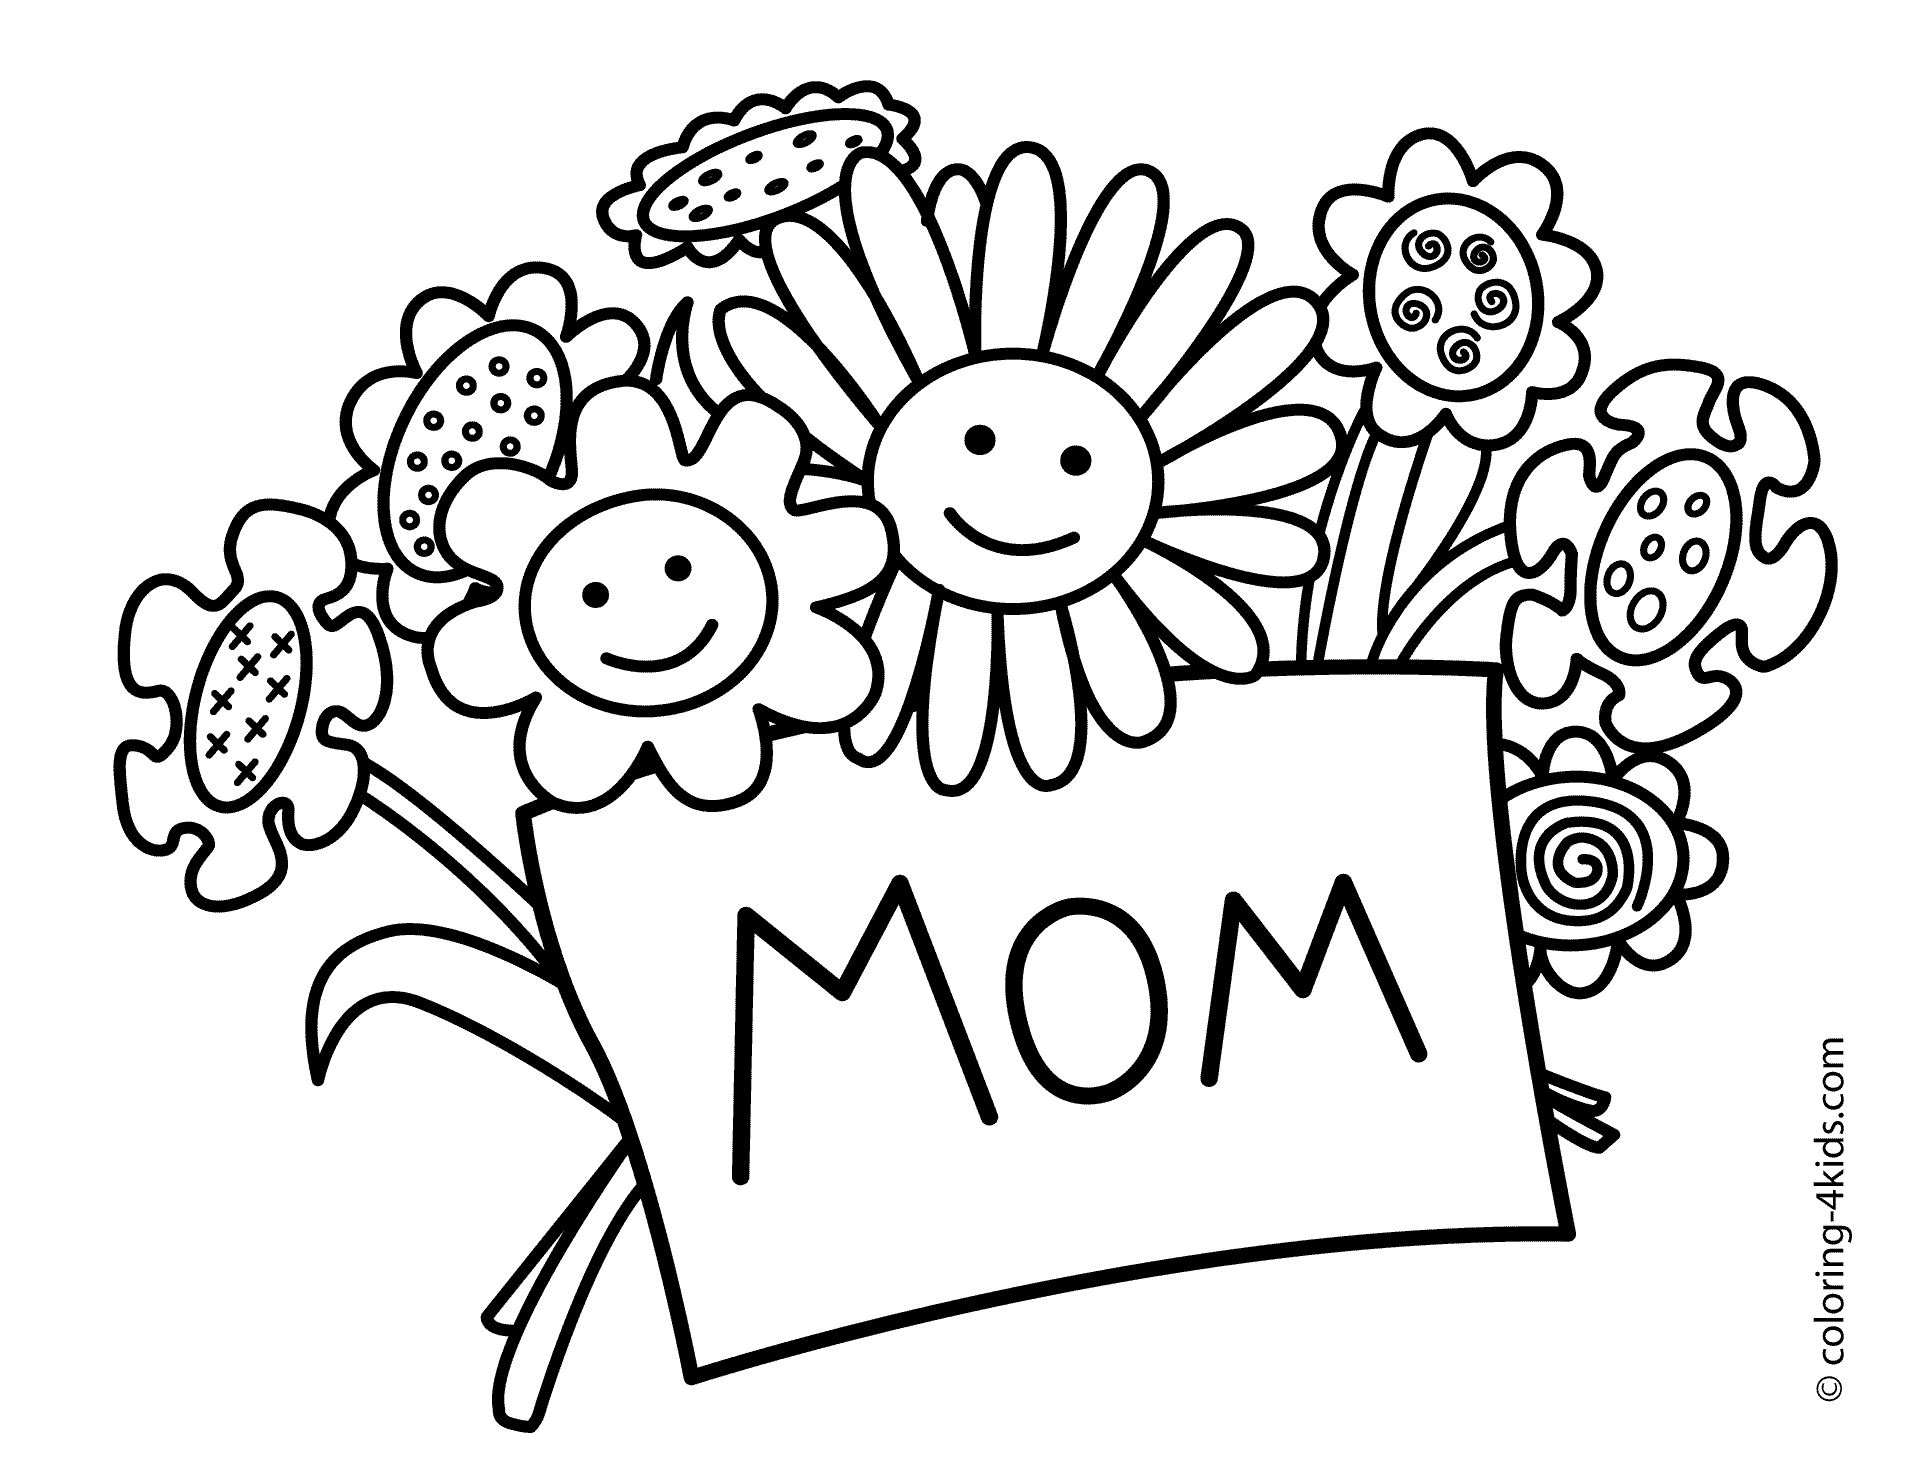 mothers day coloring pages preschool mother day coloring pages to download and print for free pages day mothers preschool coloring 